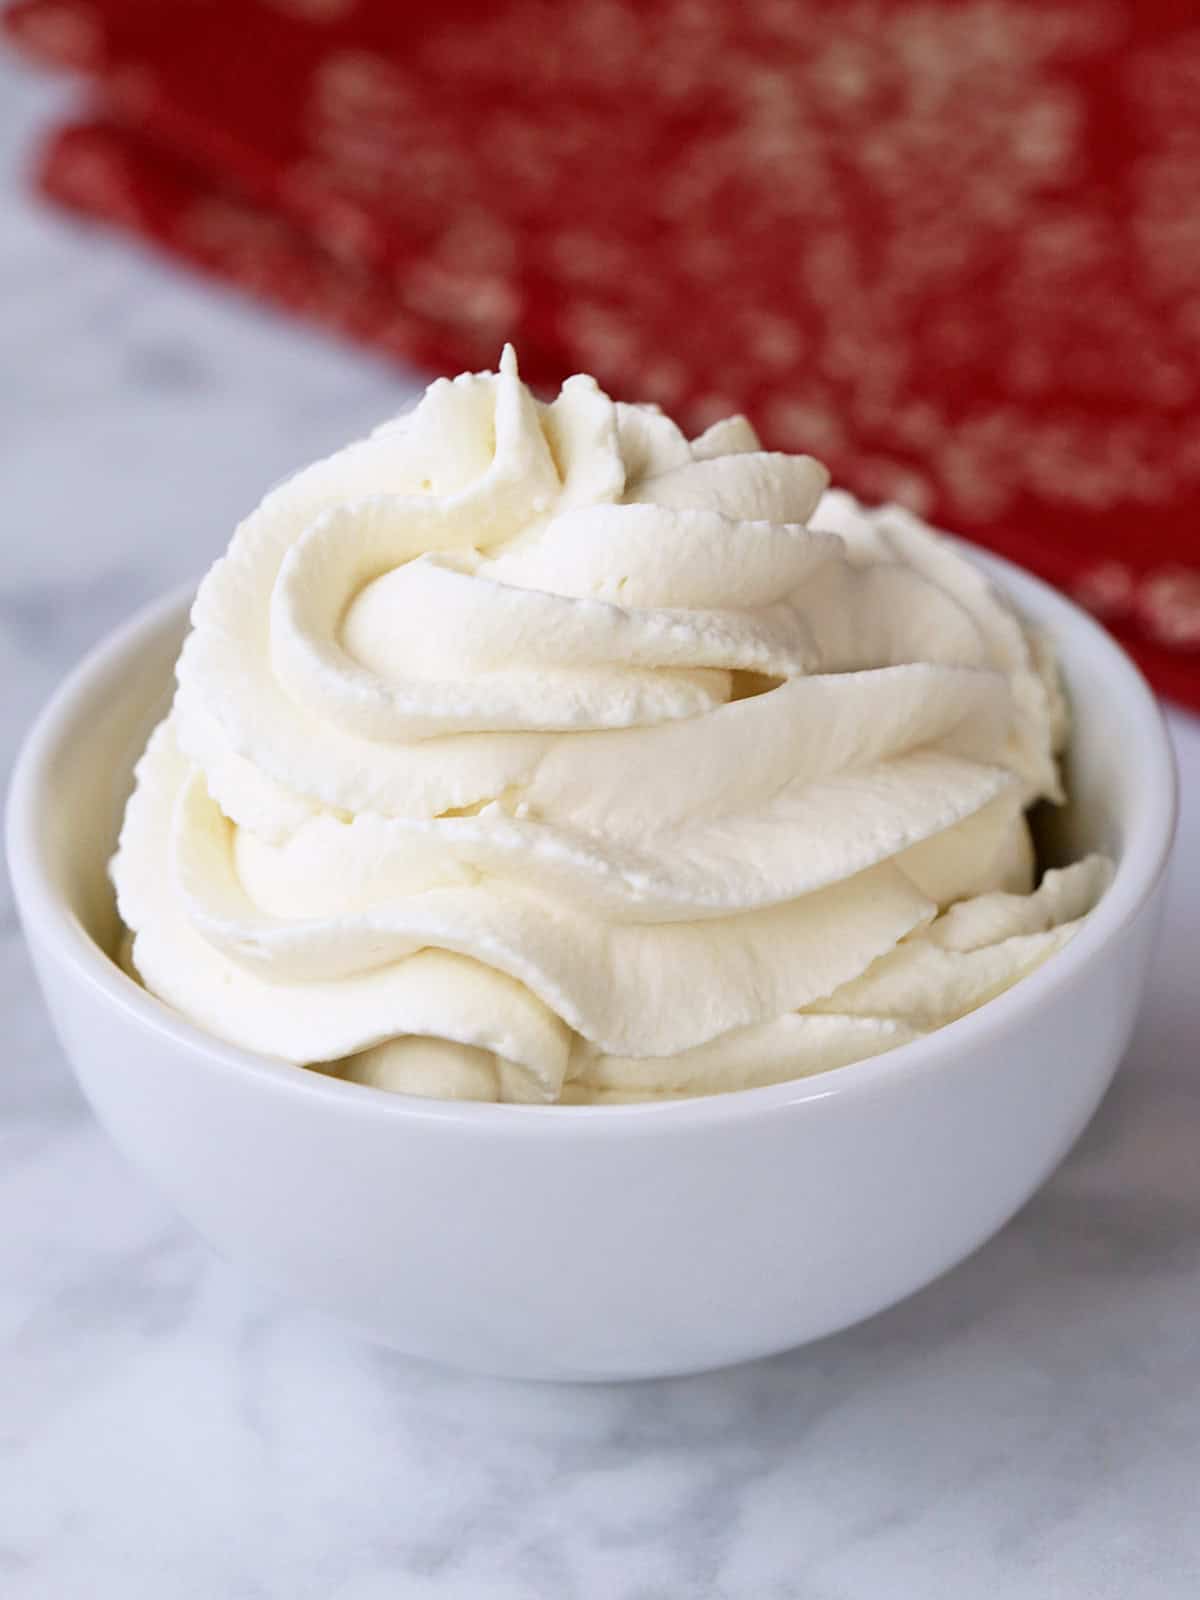 Keto whipped cream is served in a bowl with a napkin.